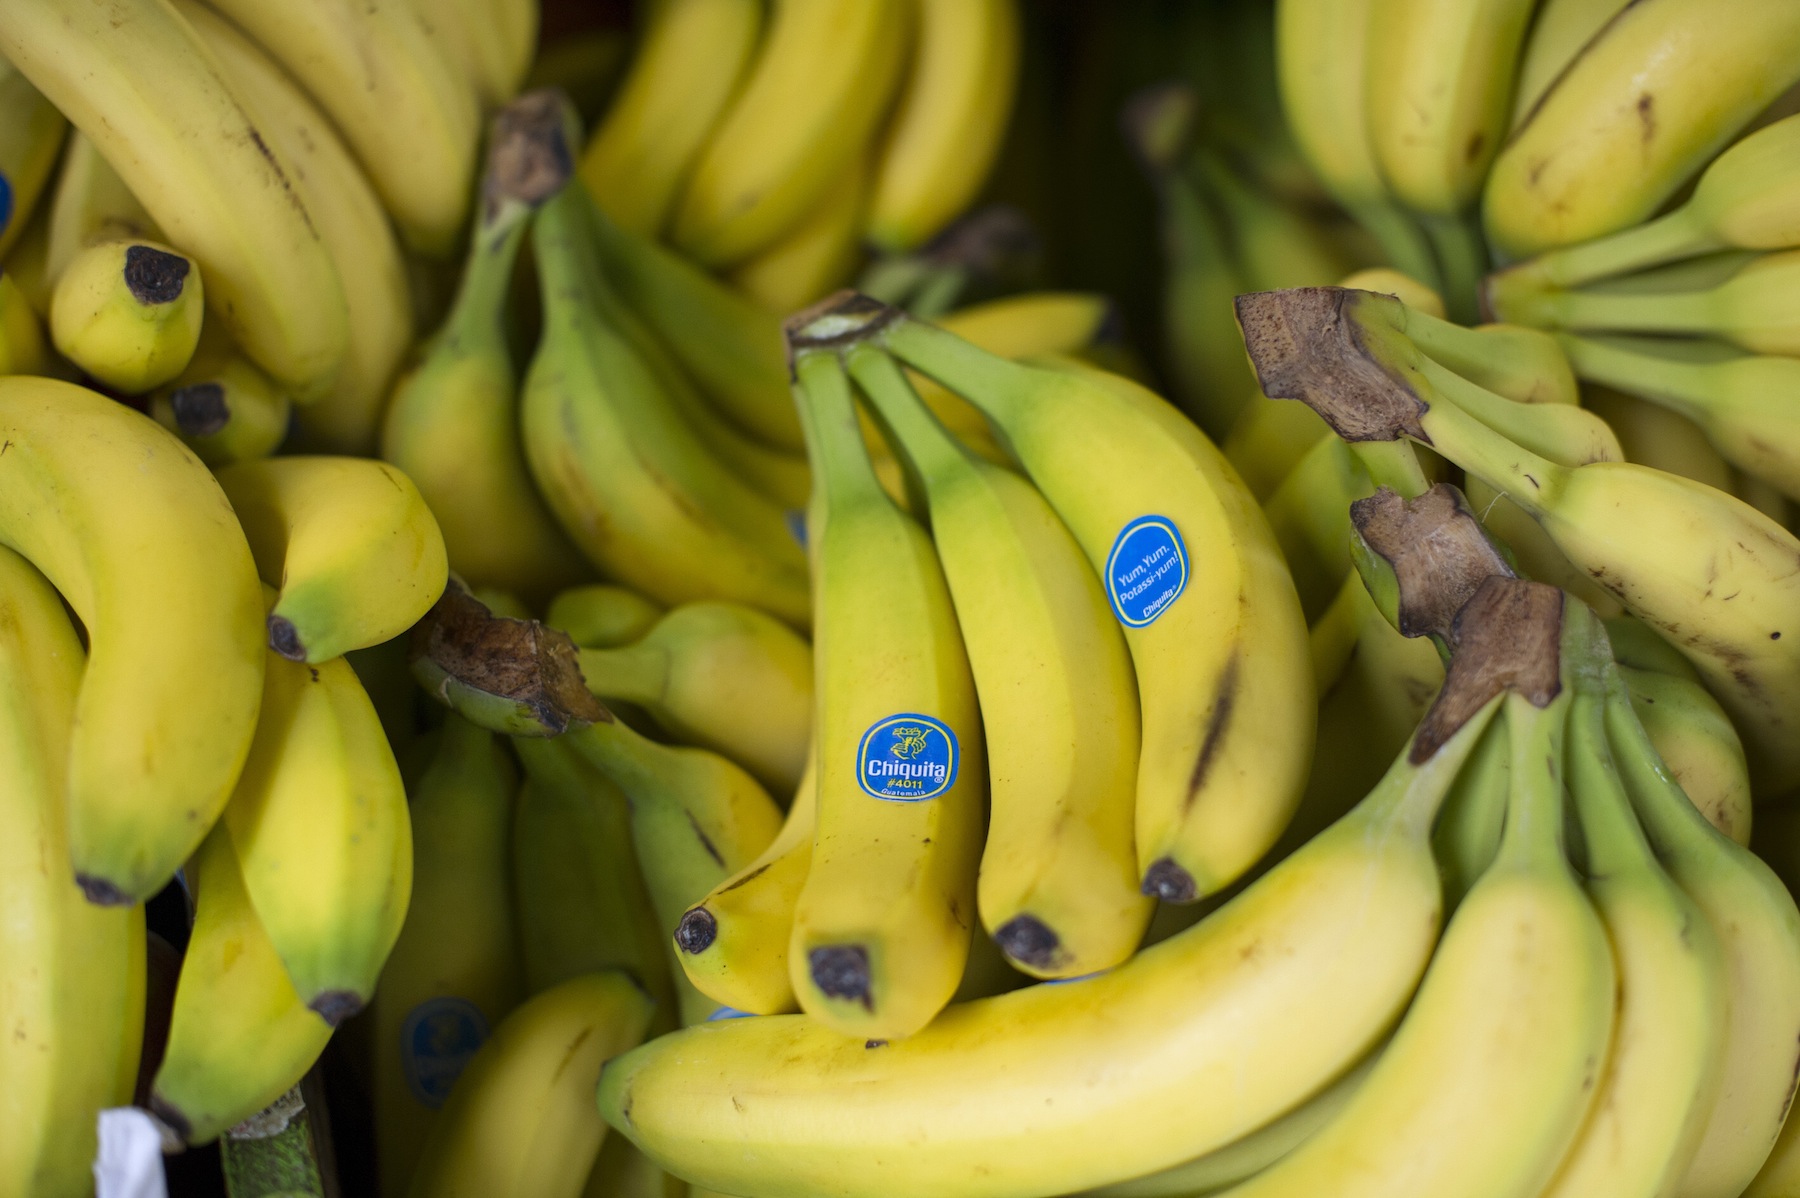 Chiquita Brands International Inc. bananas are displayed at a store in San Francisco on Feb. 19, 2013. (David Paul Morris—Bloomberg / Getty Images)